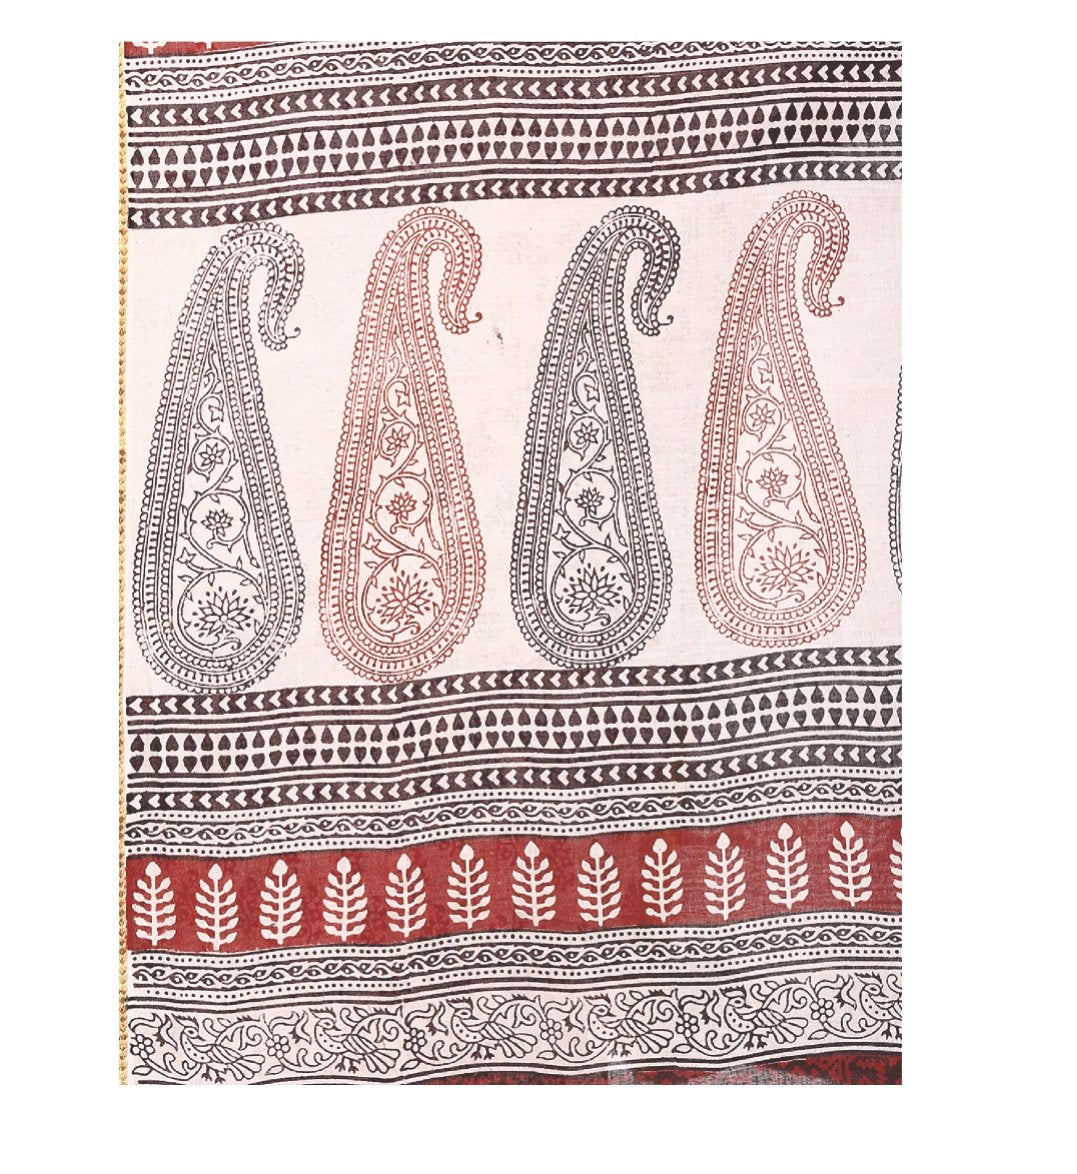 Pink Cotton Hand Block Bagh Print Handcrafted Saree-Saree-Kalakari India-ZIBASA0076-Bagh, Cotton, Geographical Indication, Hand Blocks, Hand Crafted, Heritage Prints, Natural Dyes, Sarees, Sustainable Fabrics-[Linen,Ethnic,wear,Fashionista,Handloom,Handicraft,Indigo,blockprint,block,print,Cotton,Chanderi,Blue, latest,classy,party,bollywood,trendy,summer,style,traditional,formal,elegant,unique,style,hand,block,print, dabu,booti,gift,present,glamorous,affordable,collectible,Sari,Saree,printed, hol